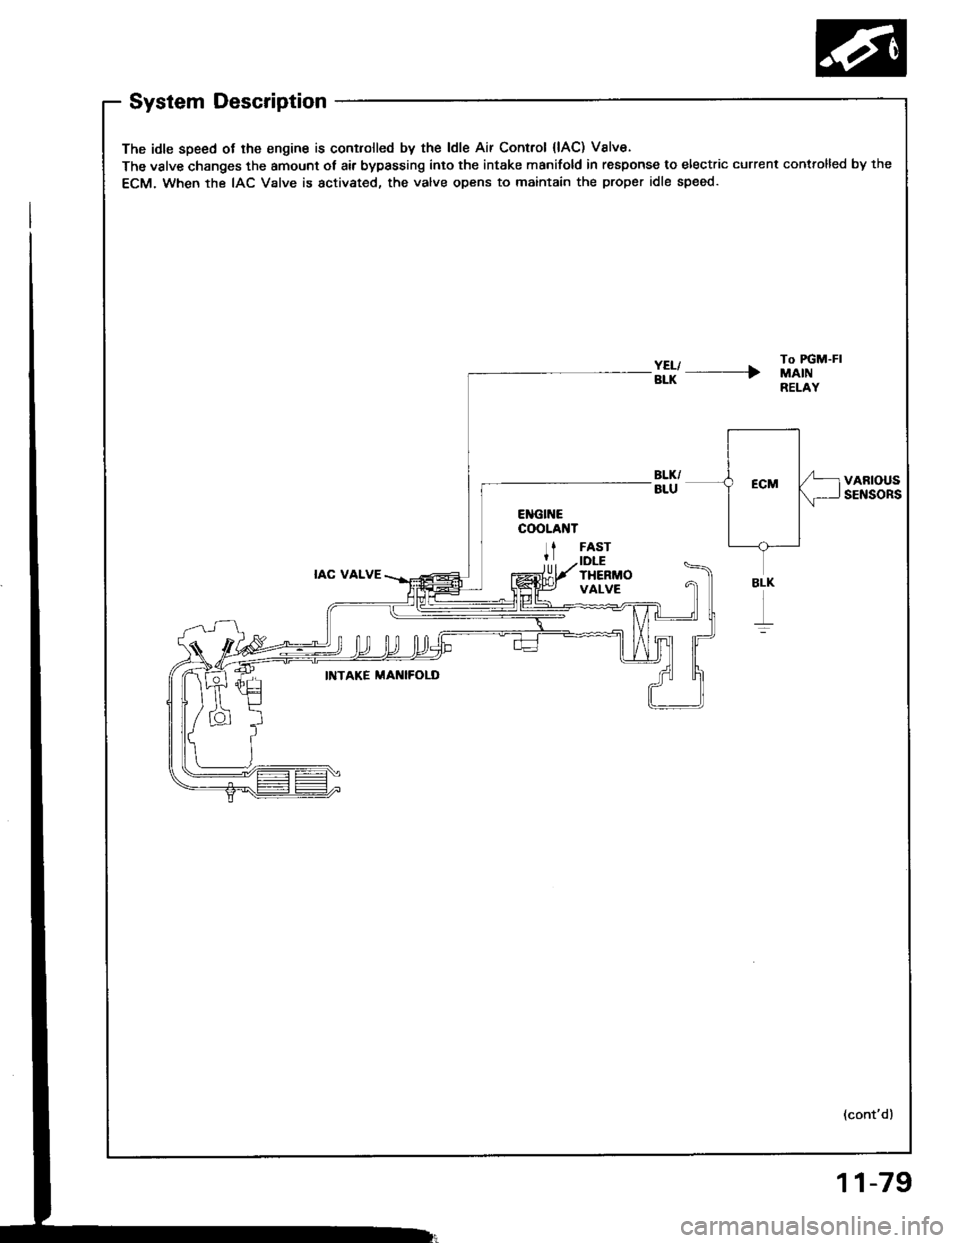 HONDA INTEGRA 1994 4.G Workshop Manual System Description
The idle speed ot lhe engine is controlled by the ldle Air Control {lAC) Valve.
The valve changes the amount ot air bypassing into the intake manifold in response to electric curren